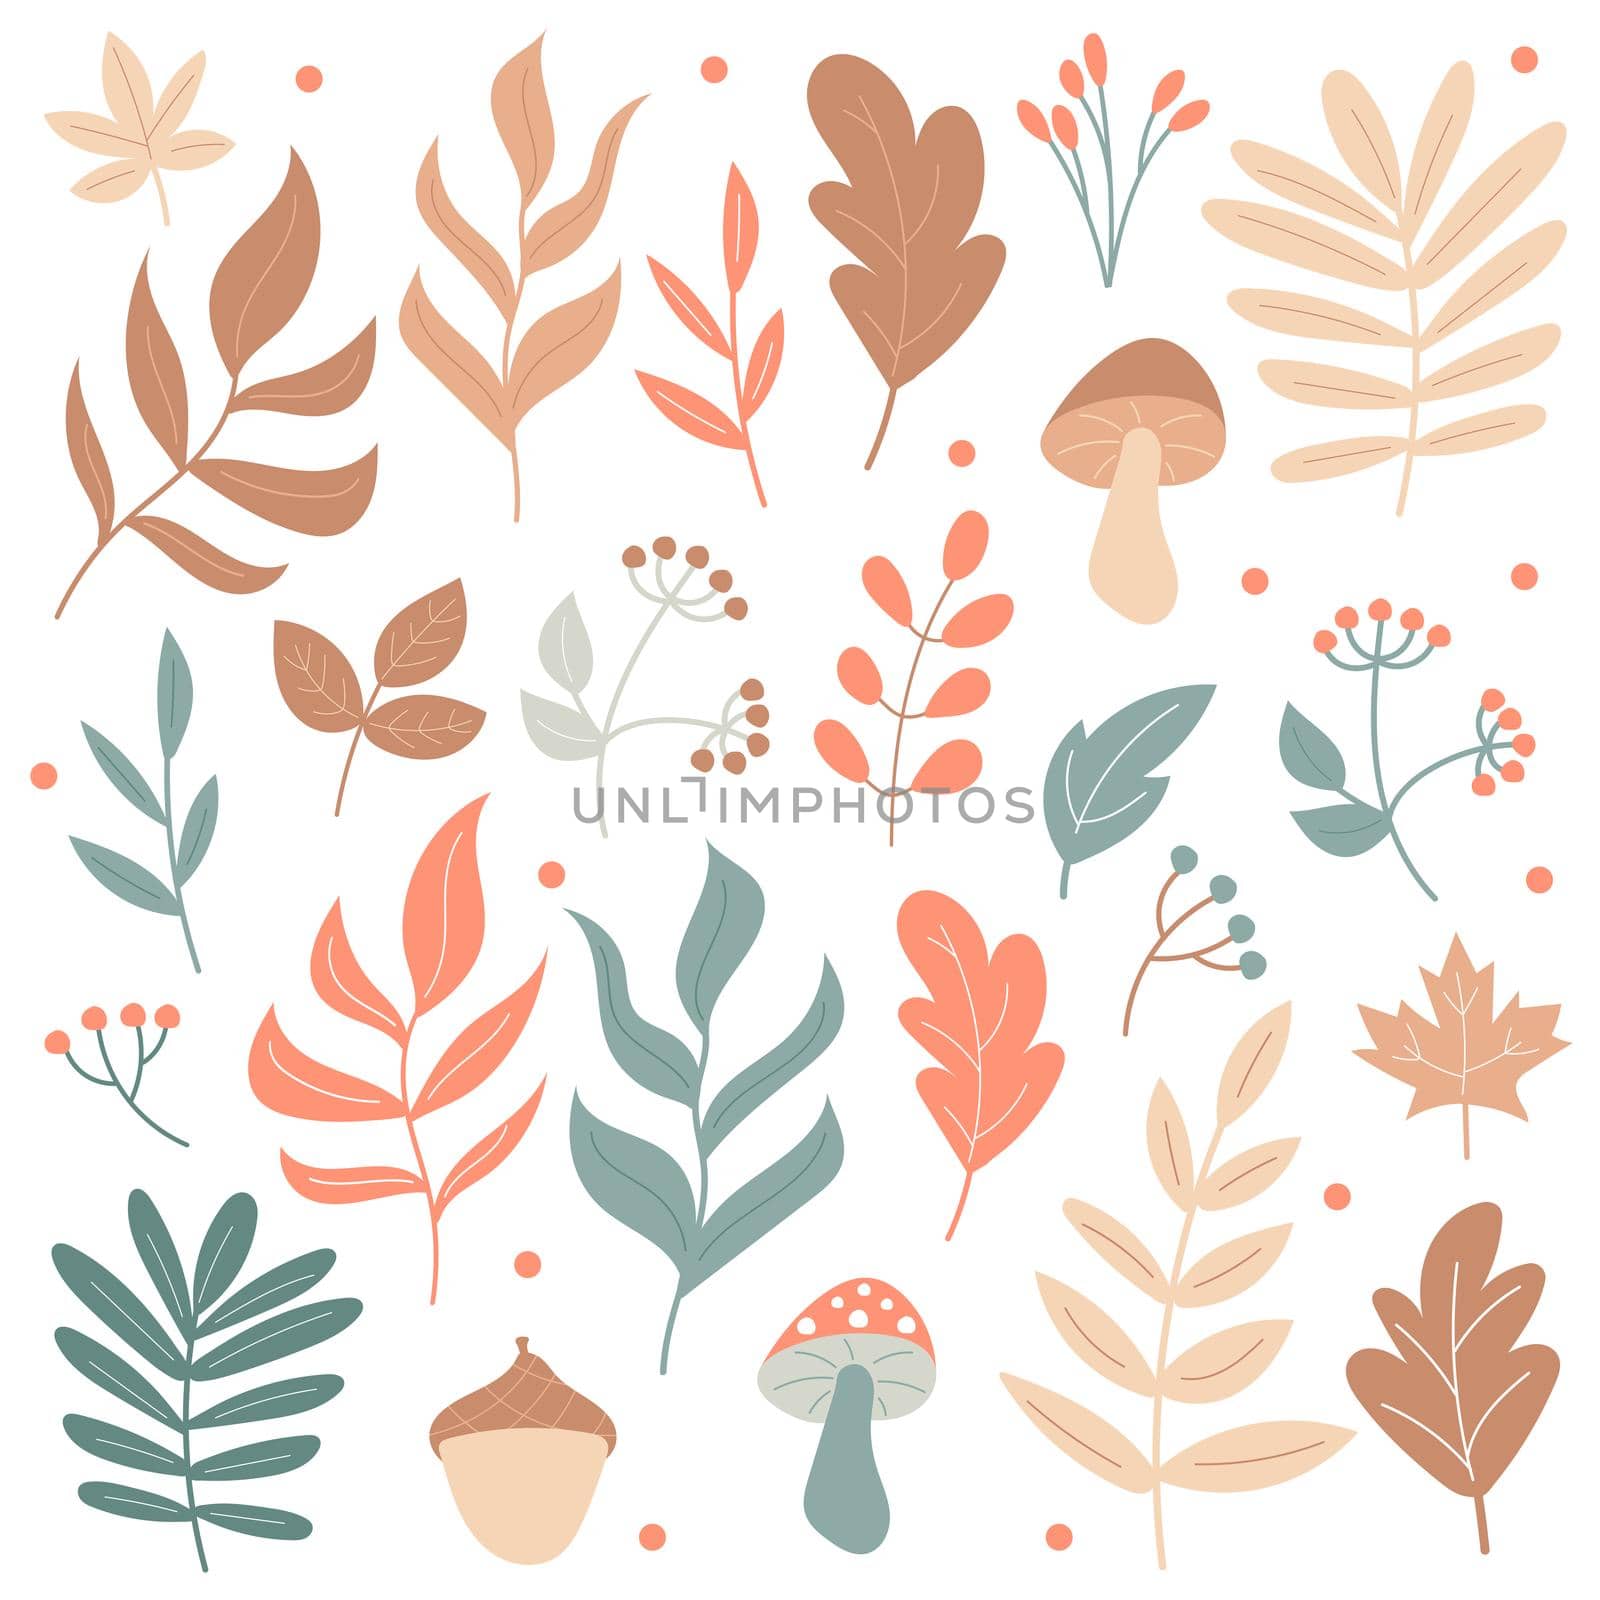 Big set of Autumn elements - mushrooms and plants - on a white background. Hand-drawn icons in pastel colors